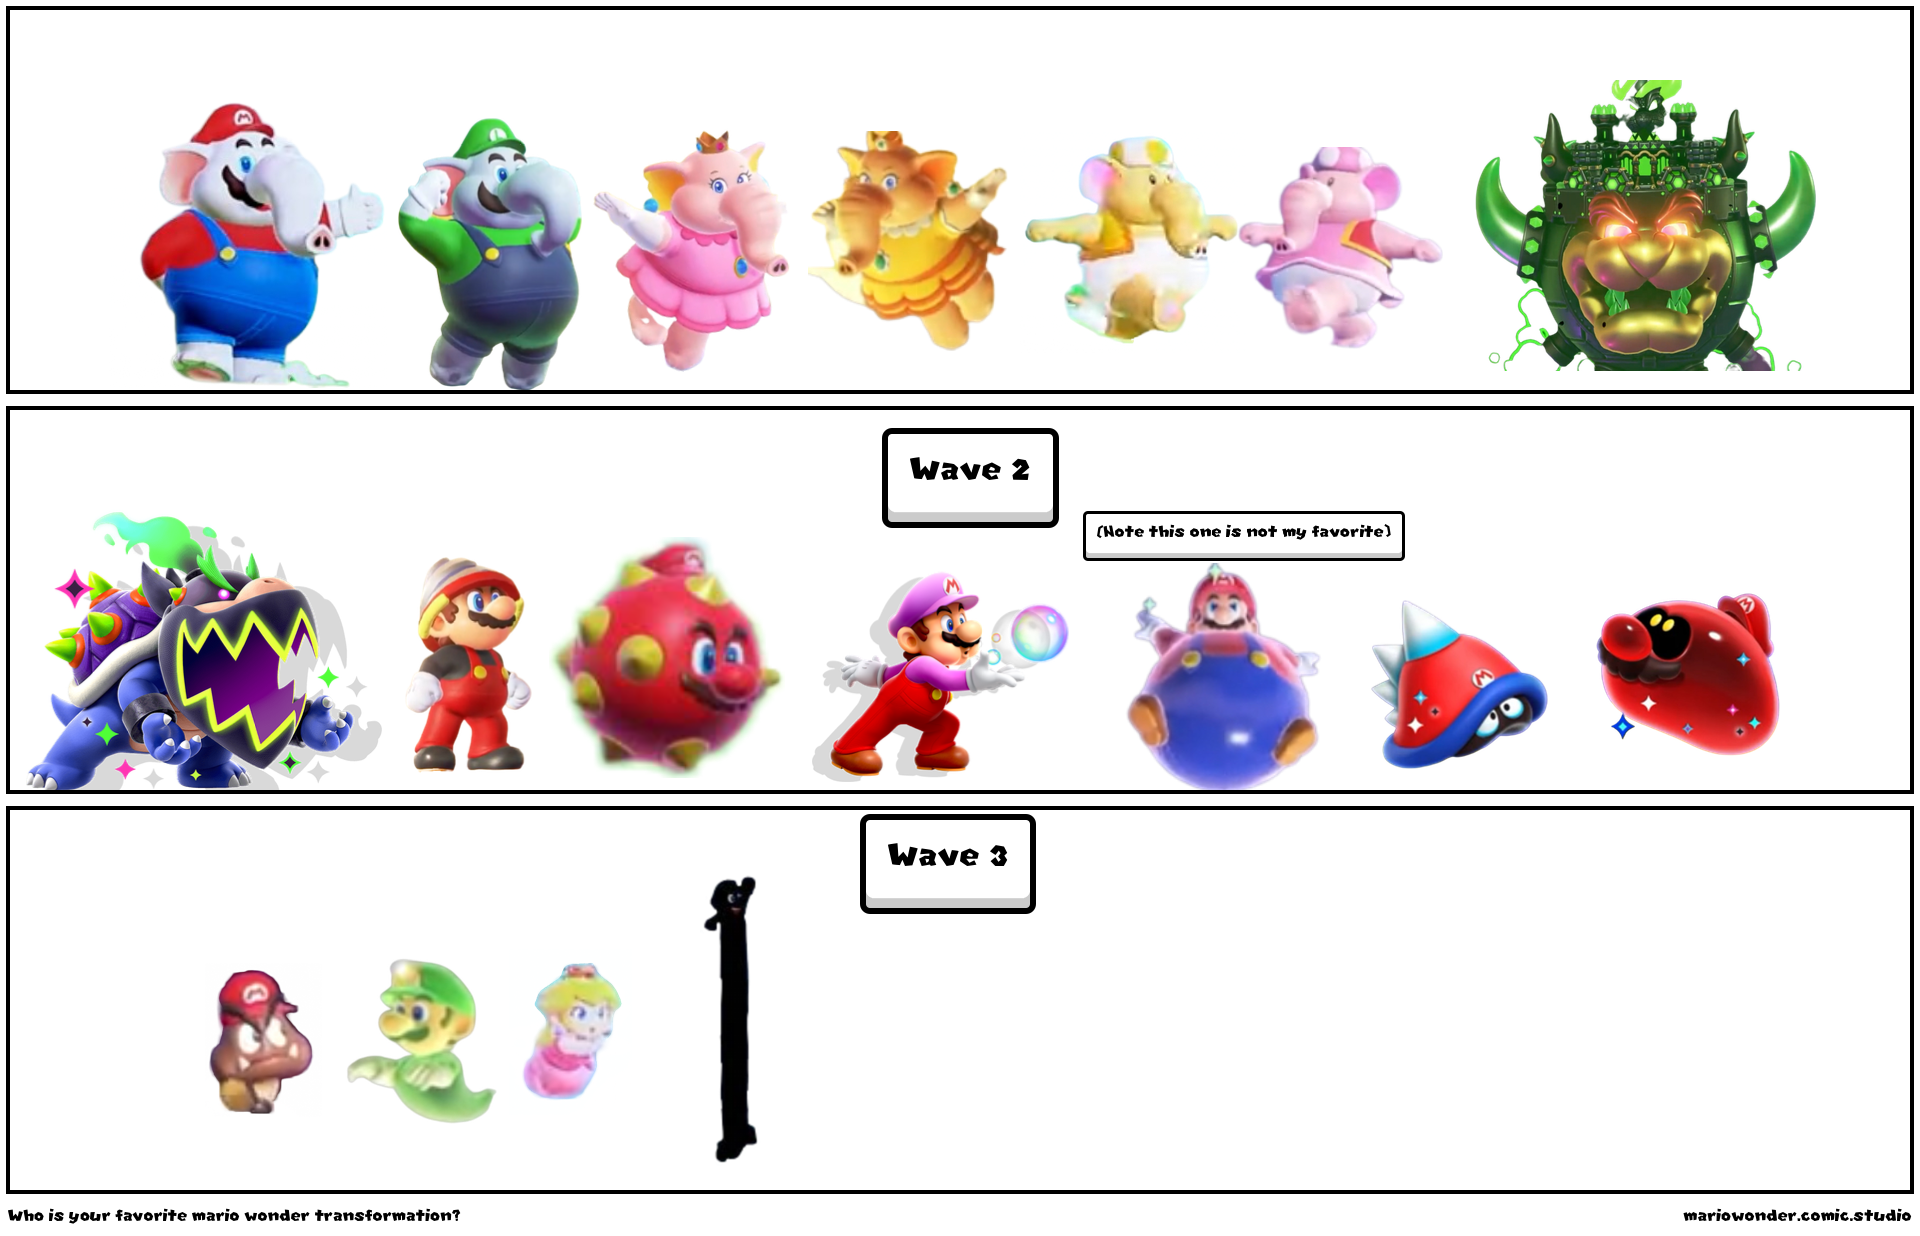 Who is your favorite mario wonder transformation?